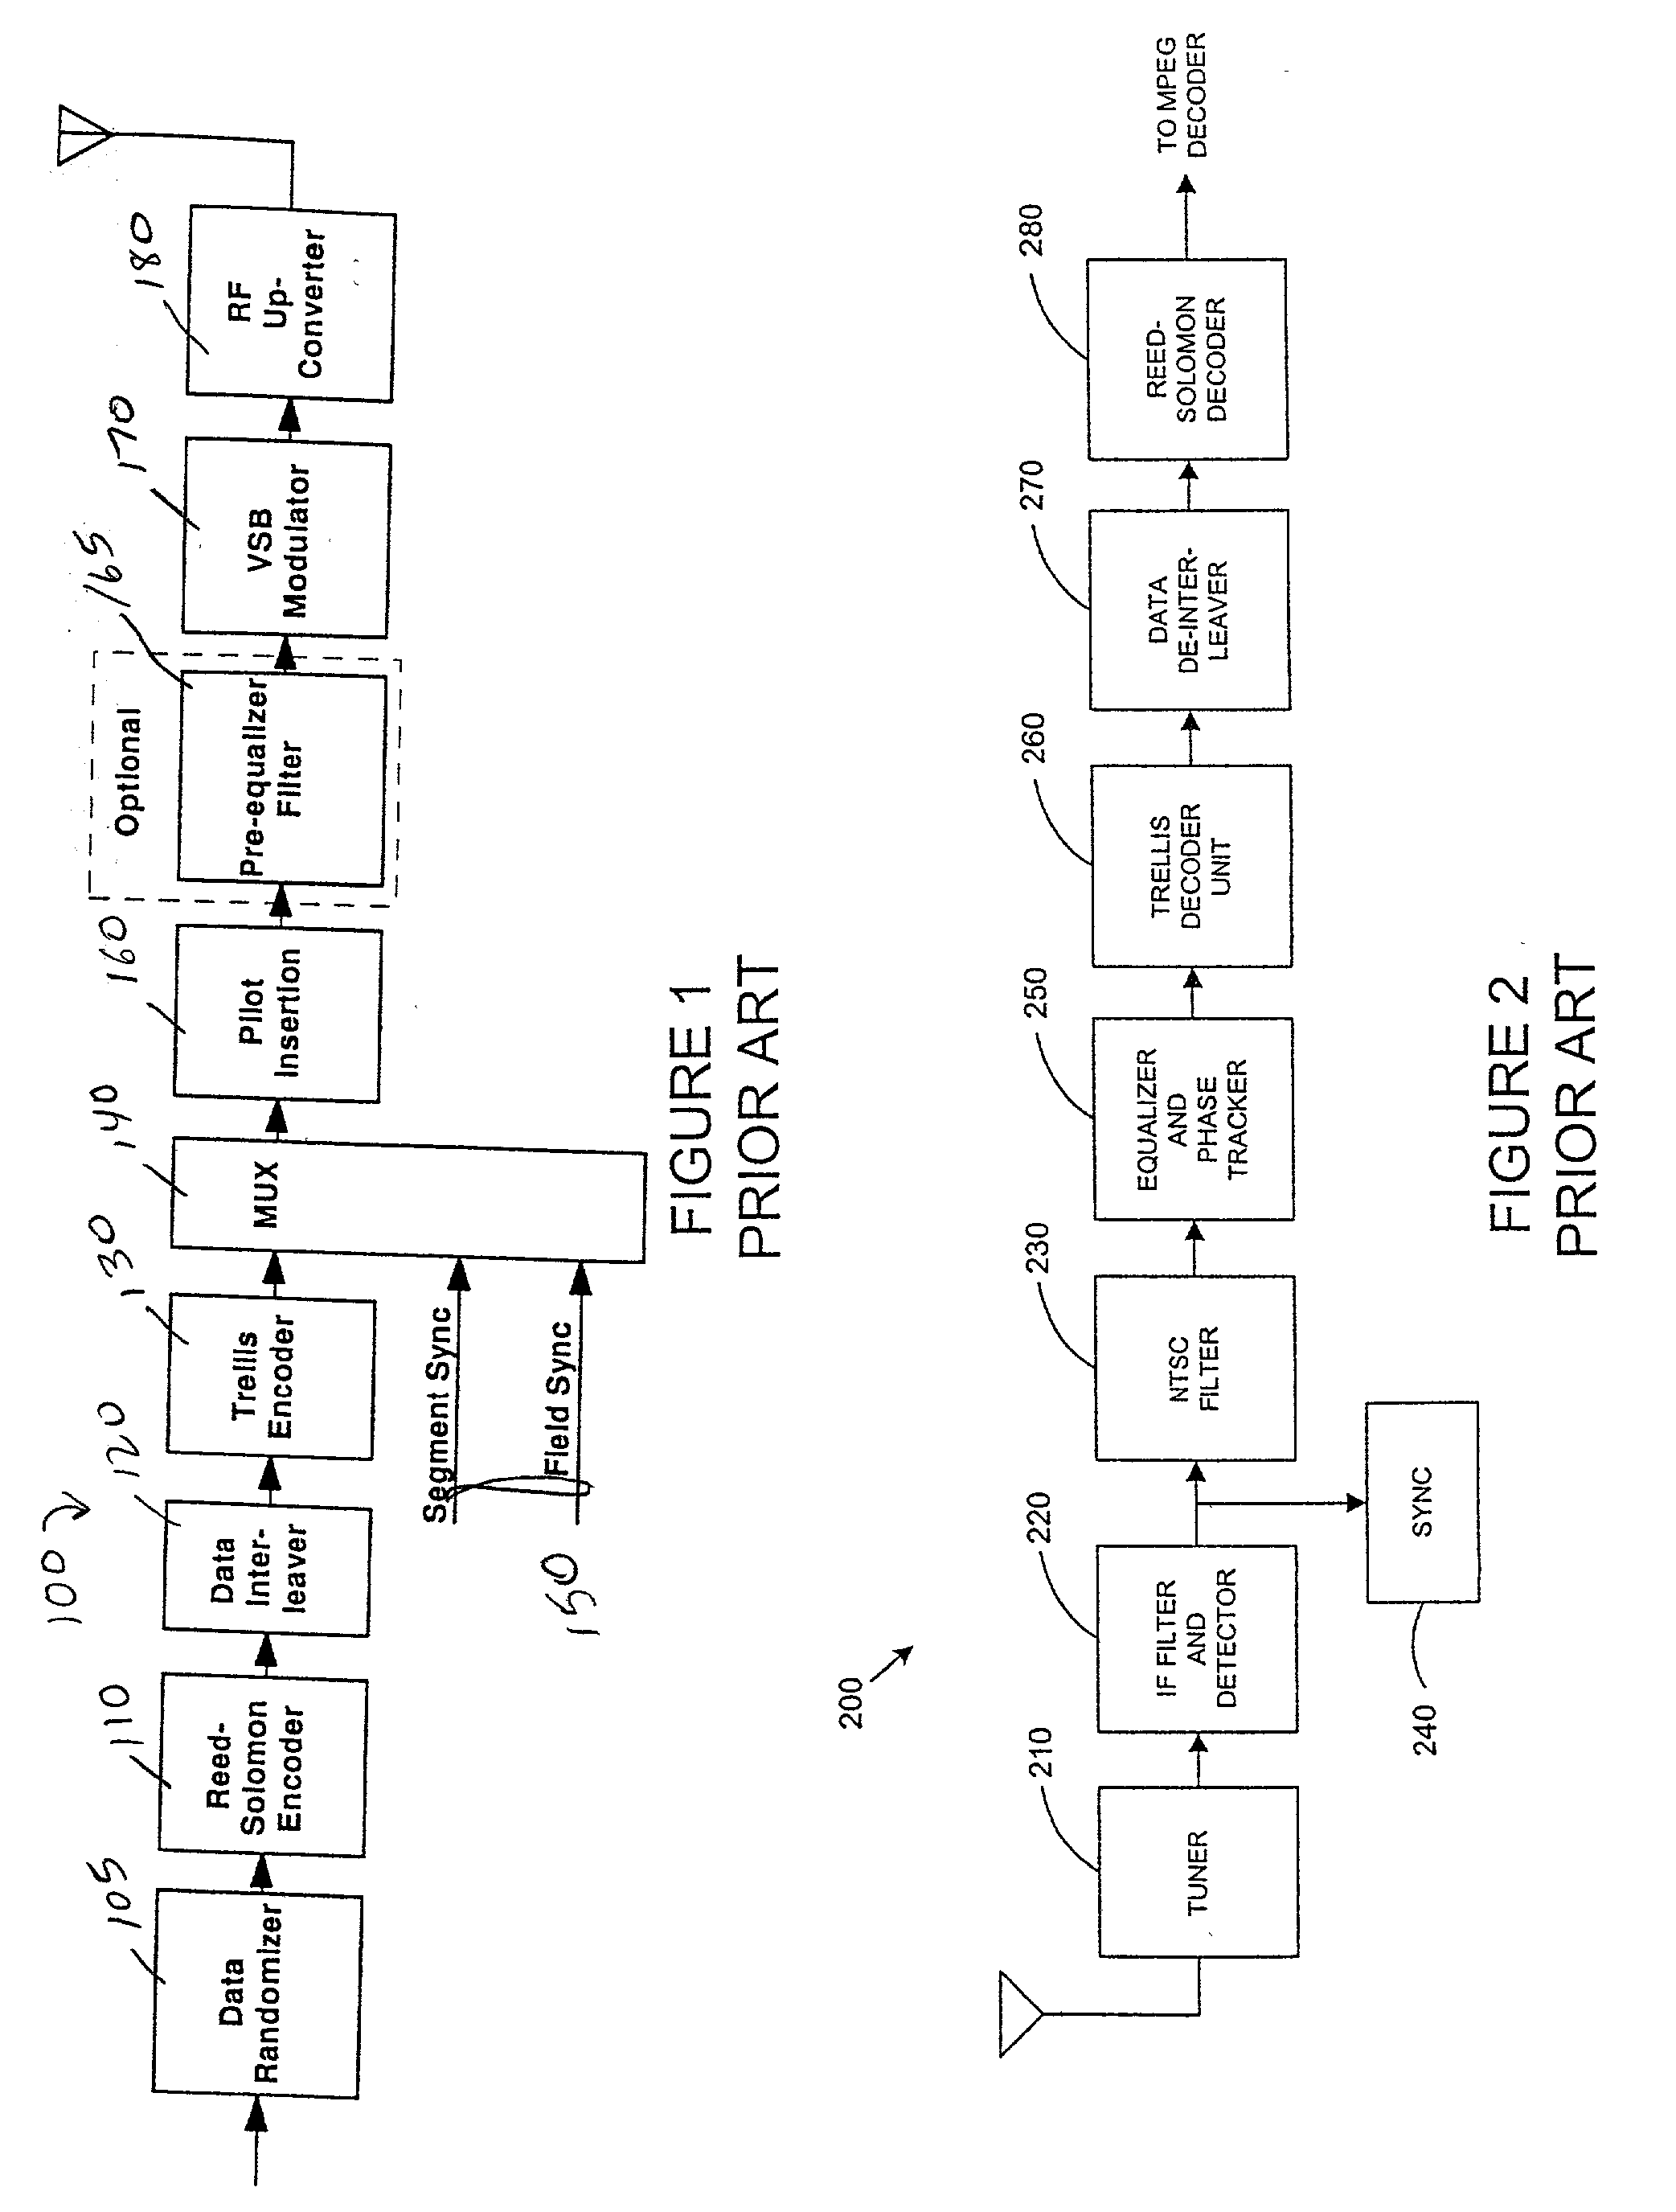 Packet identification mechanism at the transmitter and receiver for an enhanced ATSC 8-VSB system